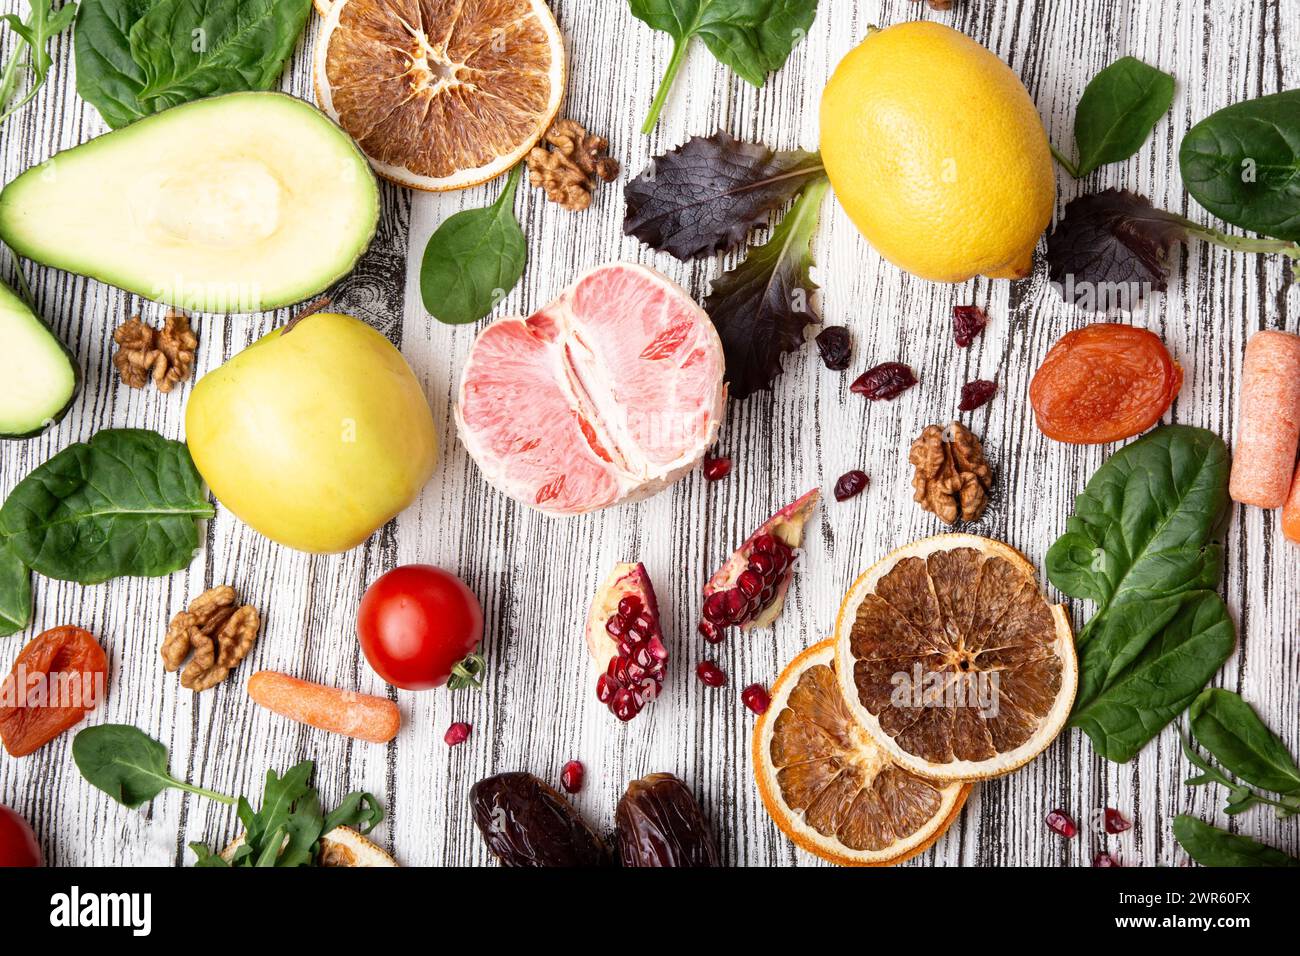 Healthy Lifestyle Choices with Fresh Fruits and Organic Vegetables. Stock Photo